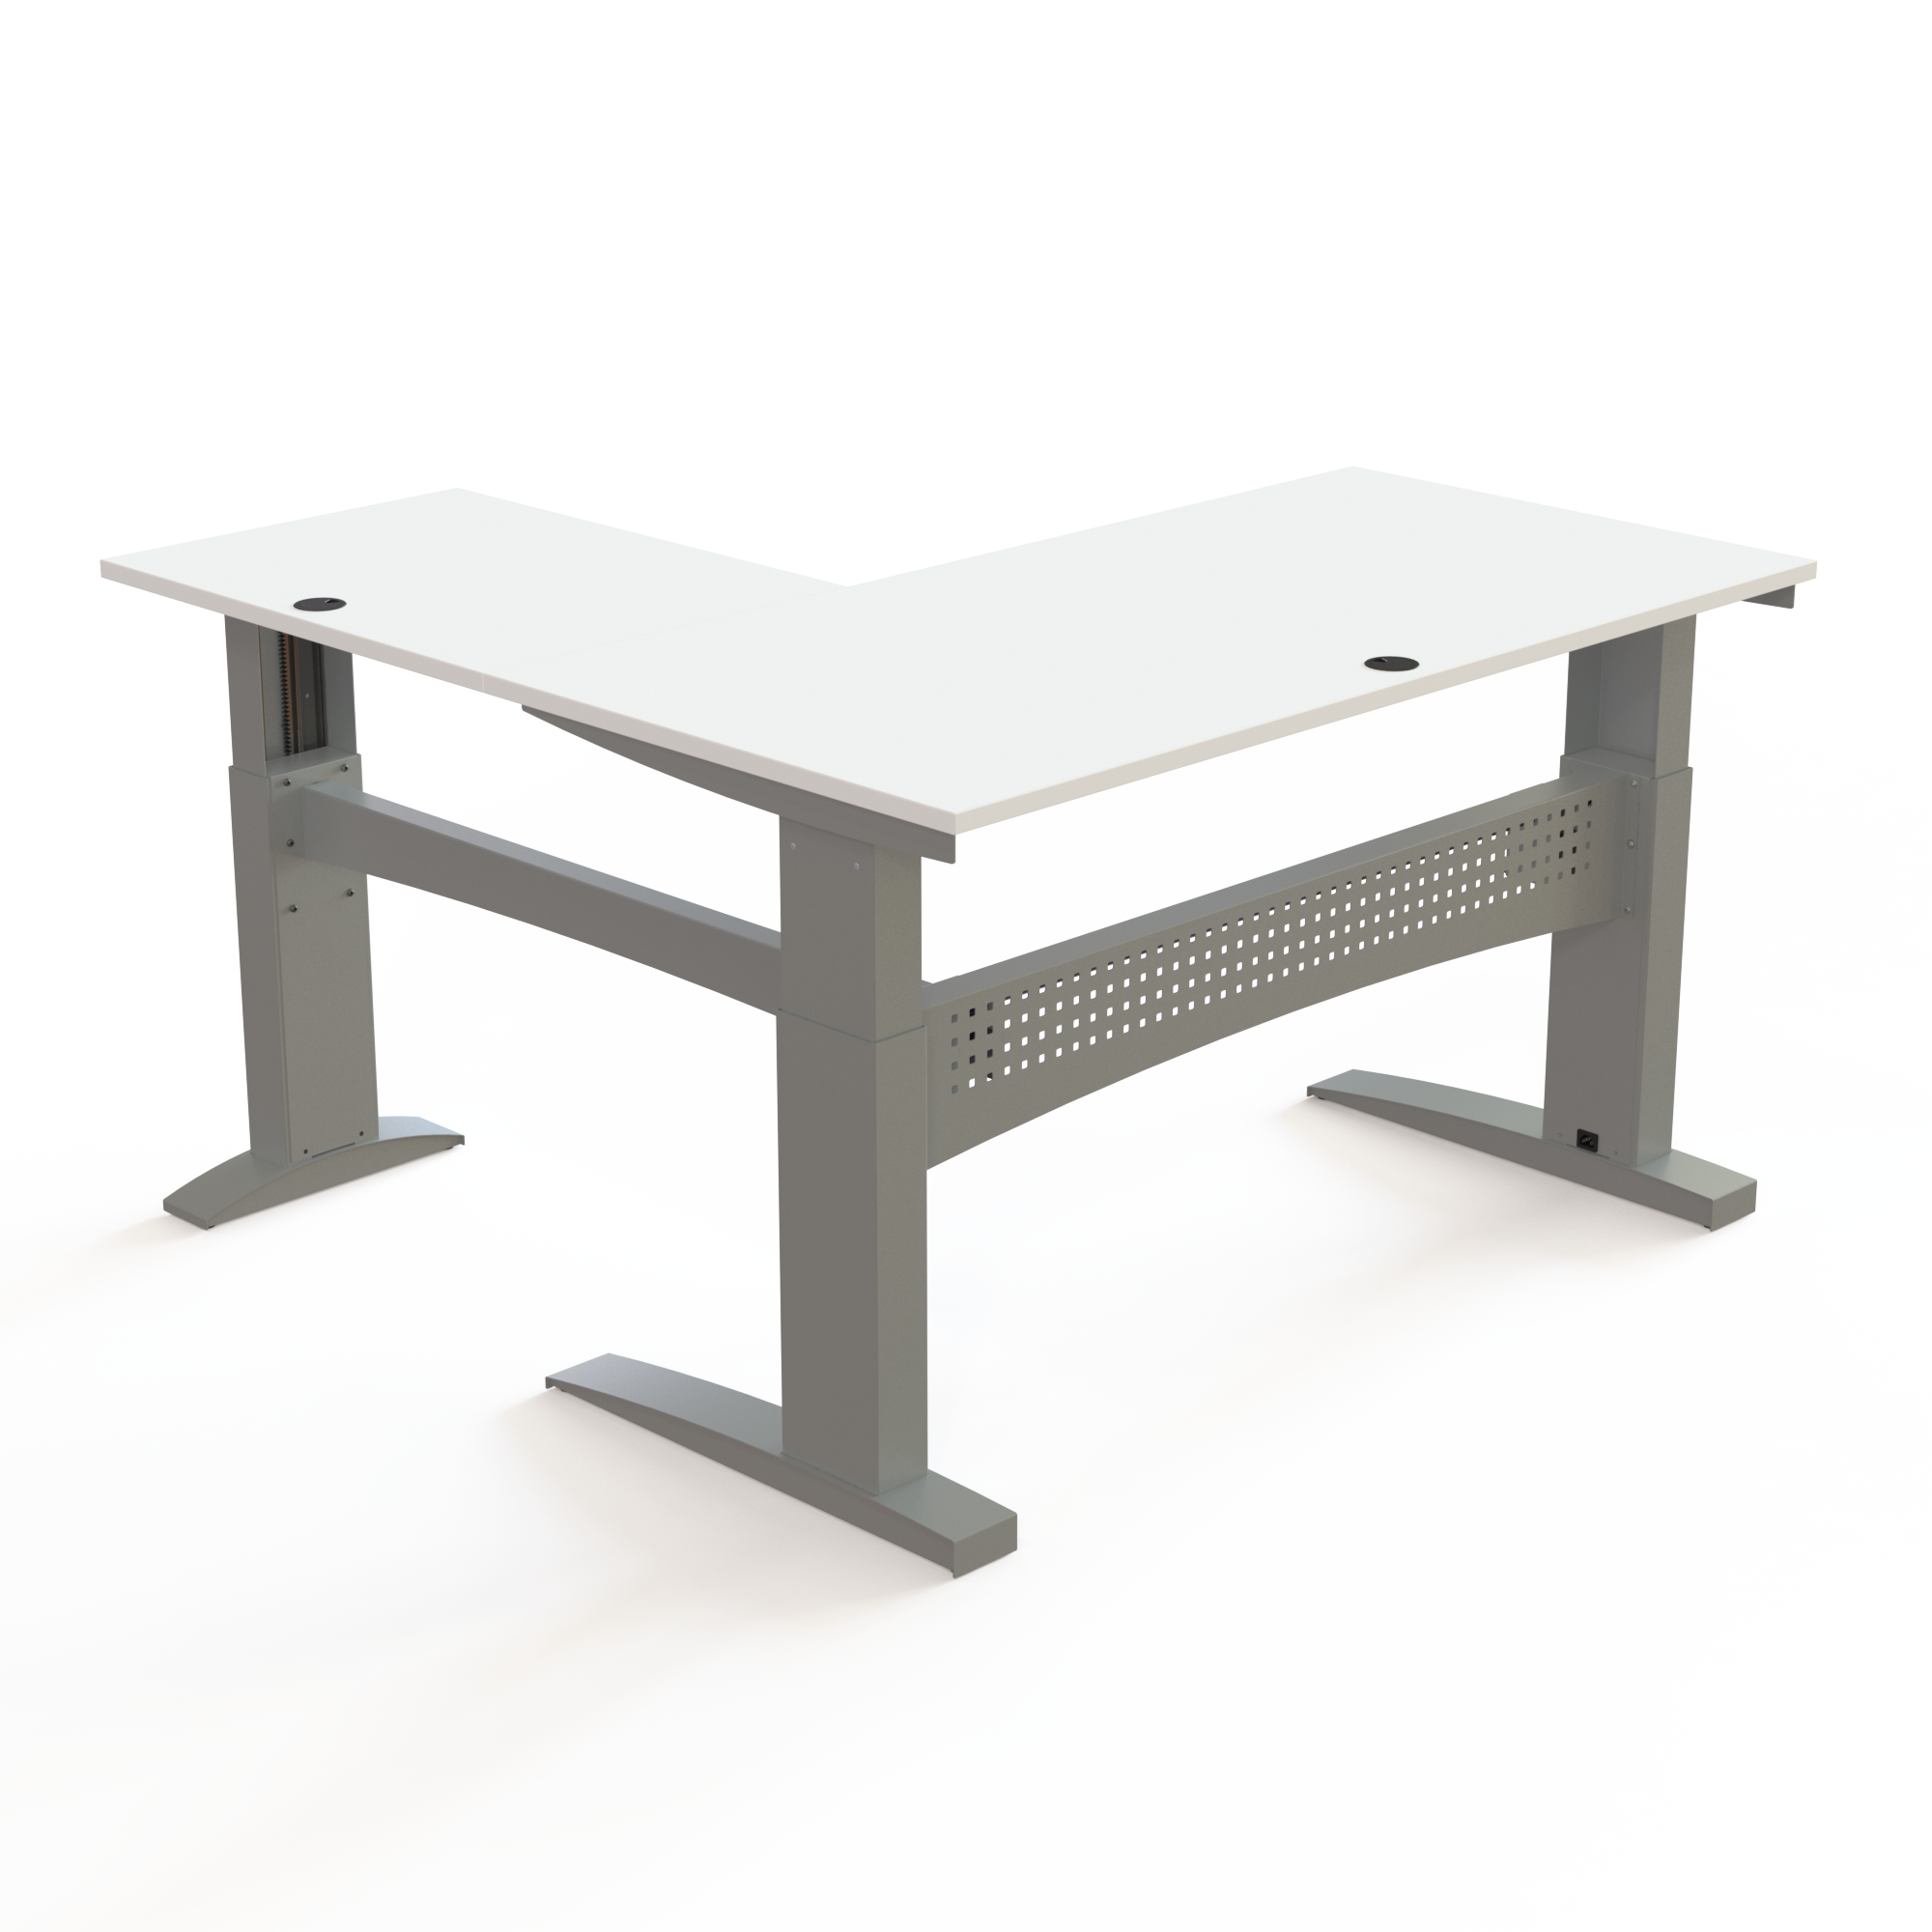 Electric Adjustable Desk | 160x160 cm | White with silver frame